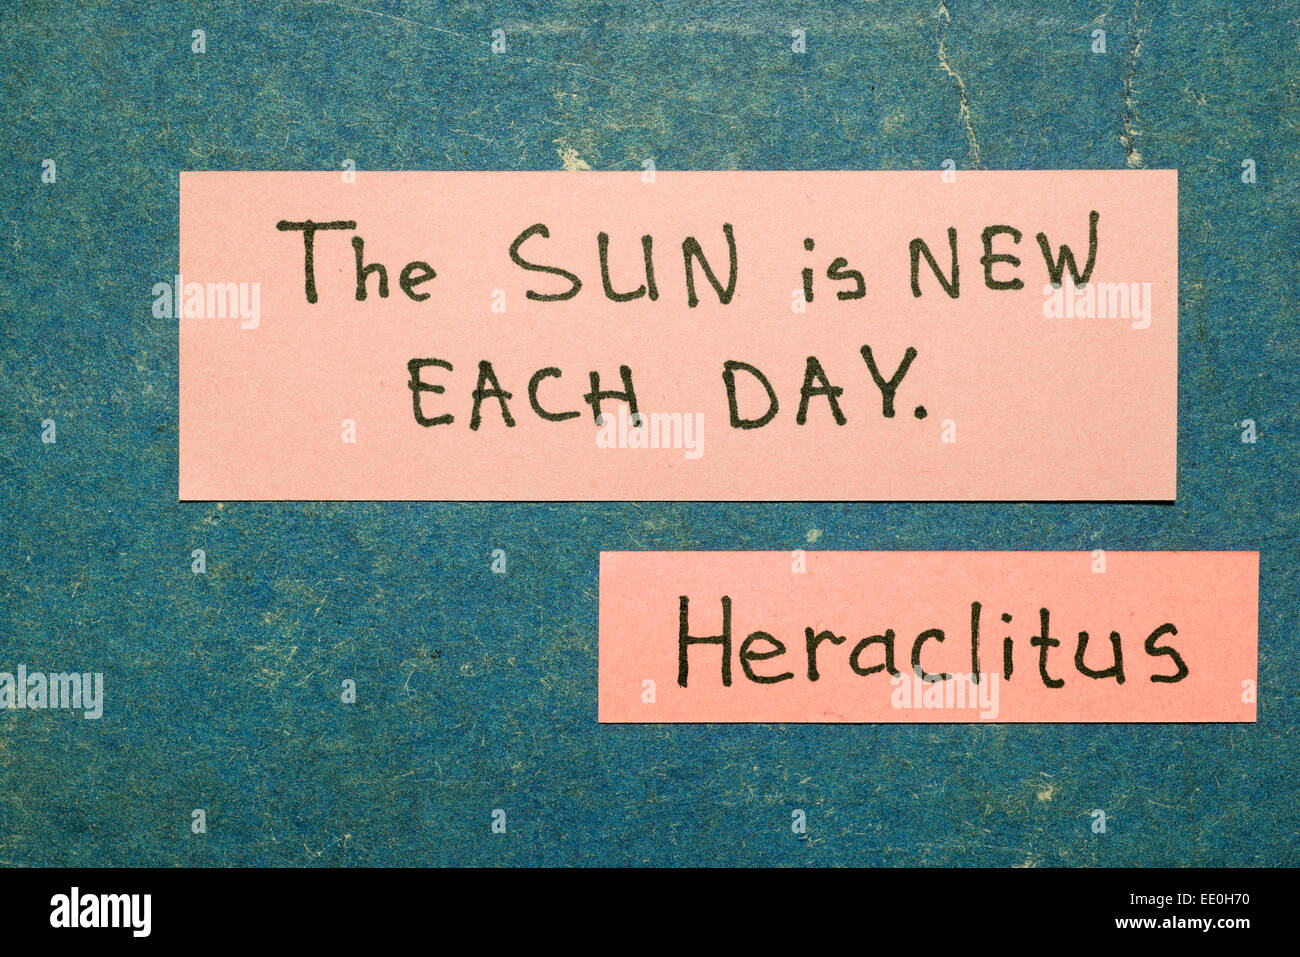 Sun is new each day - ancient Greek philosopher  Heraclitus quote interpretation with pink notes on vintage carton board Stock Photo